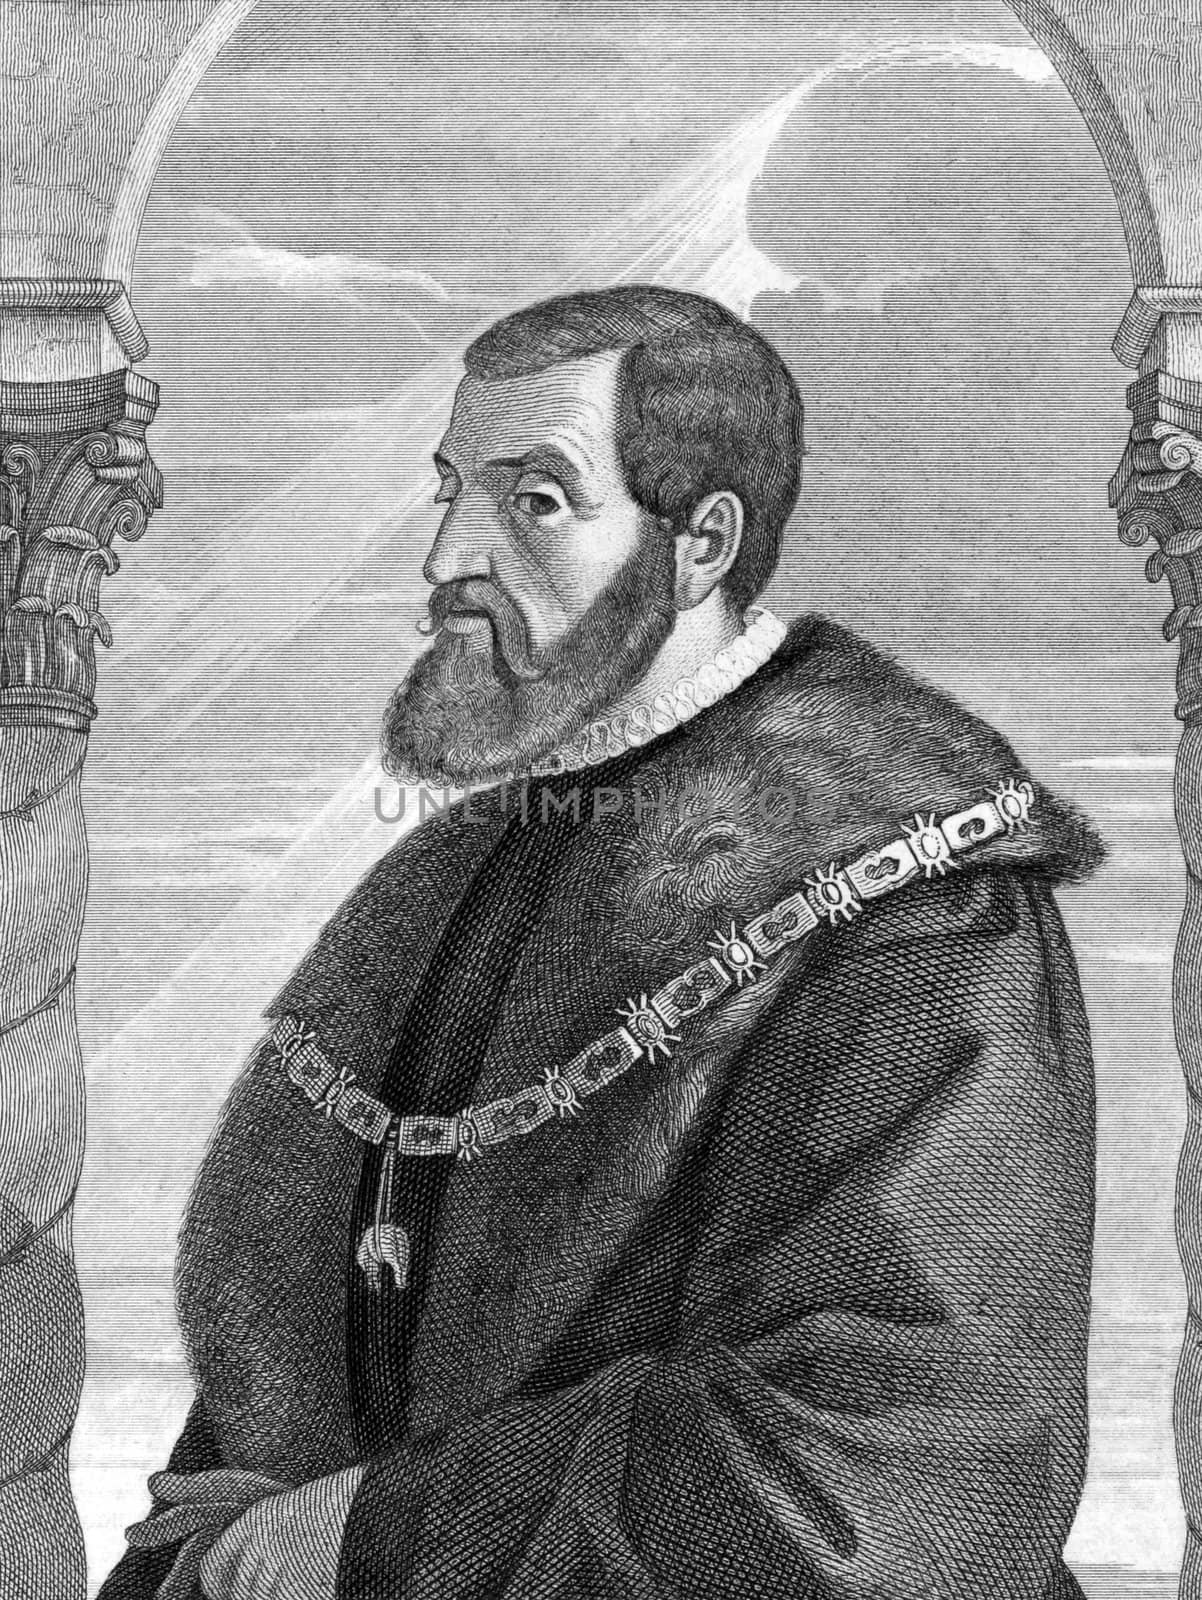 Charles V, Holy Roman Emperor (1500-1558) on engraving from 1859. Emperor of the Holy Roman Empire. Engraved by C.Muller and published in Meyers Konversations-Lexikon, Germany,1859.